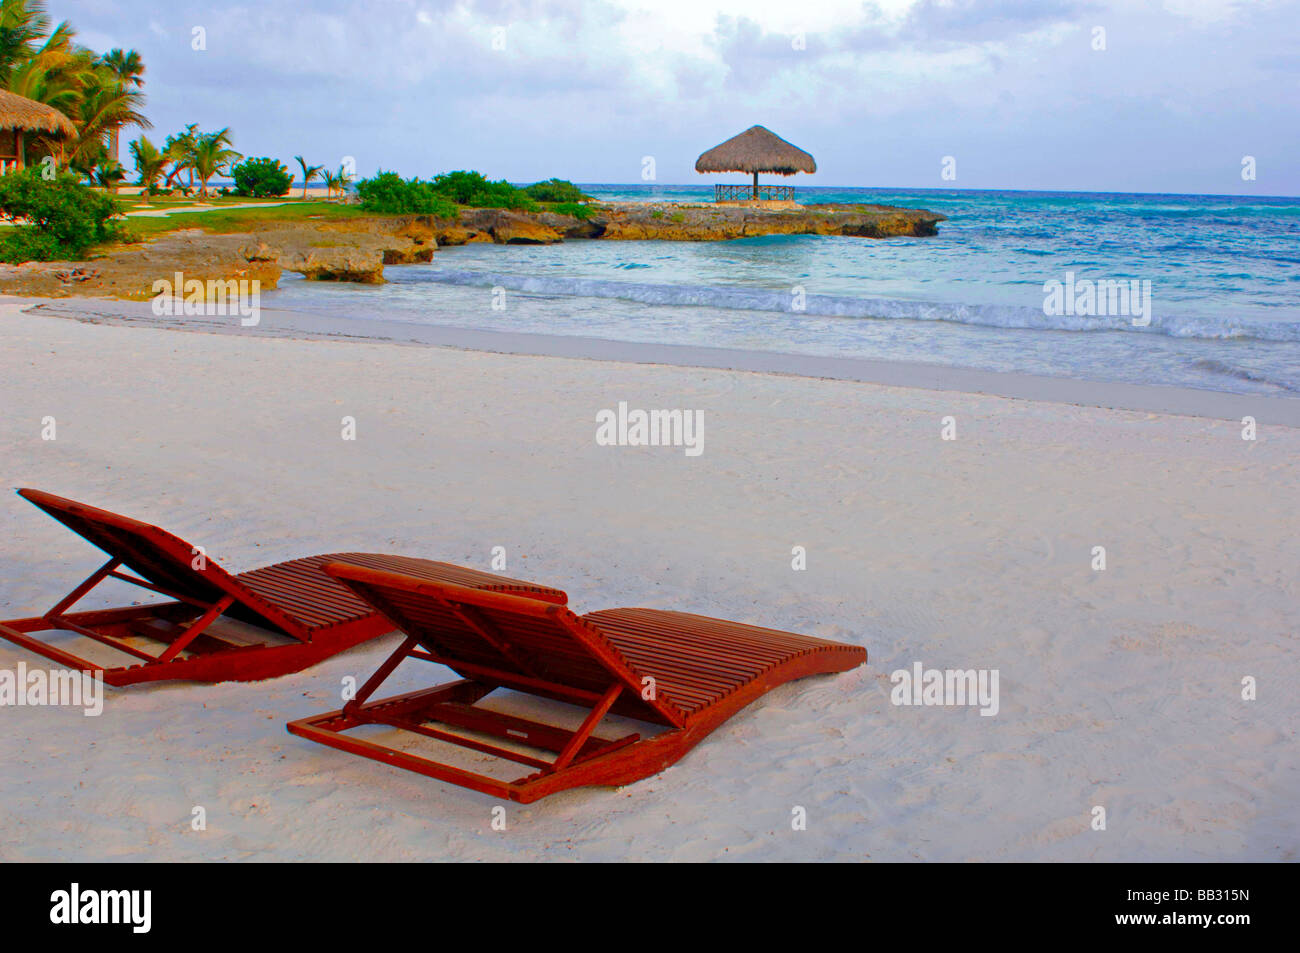 Gentle waves and breeze caress the beautiful tropical resort beach in the Caribbean ocean on the Dominican Republic coastline Stock Photo